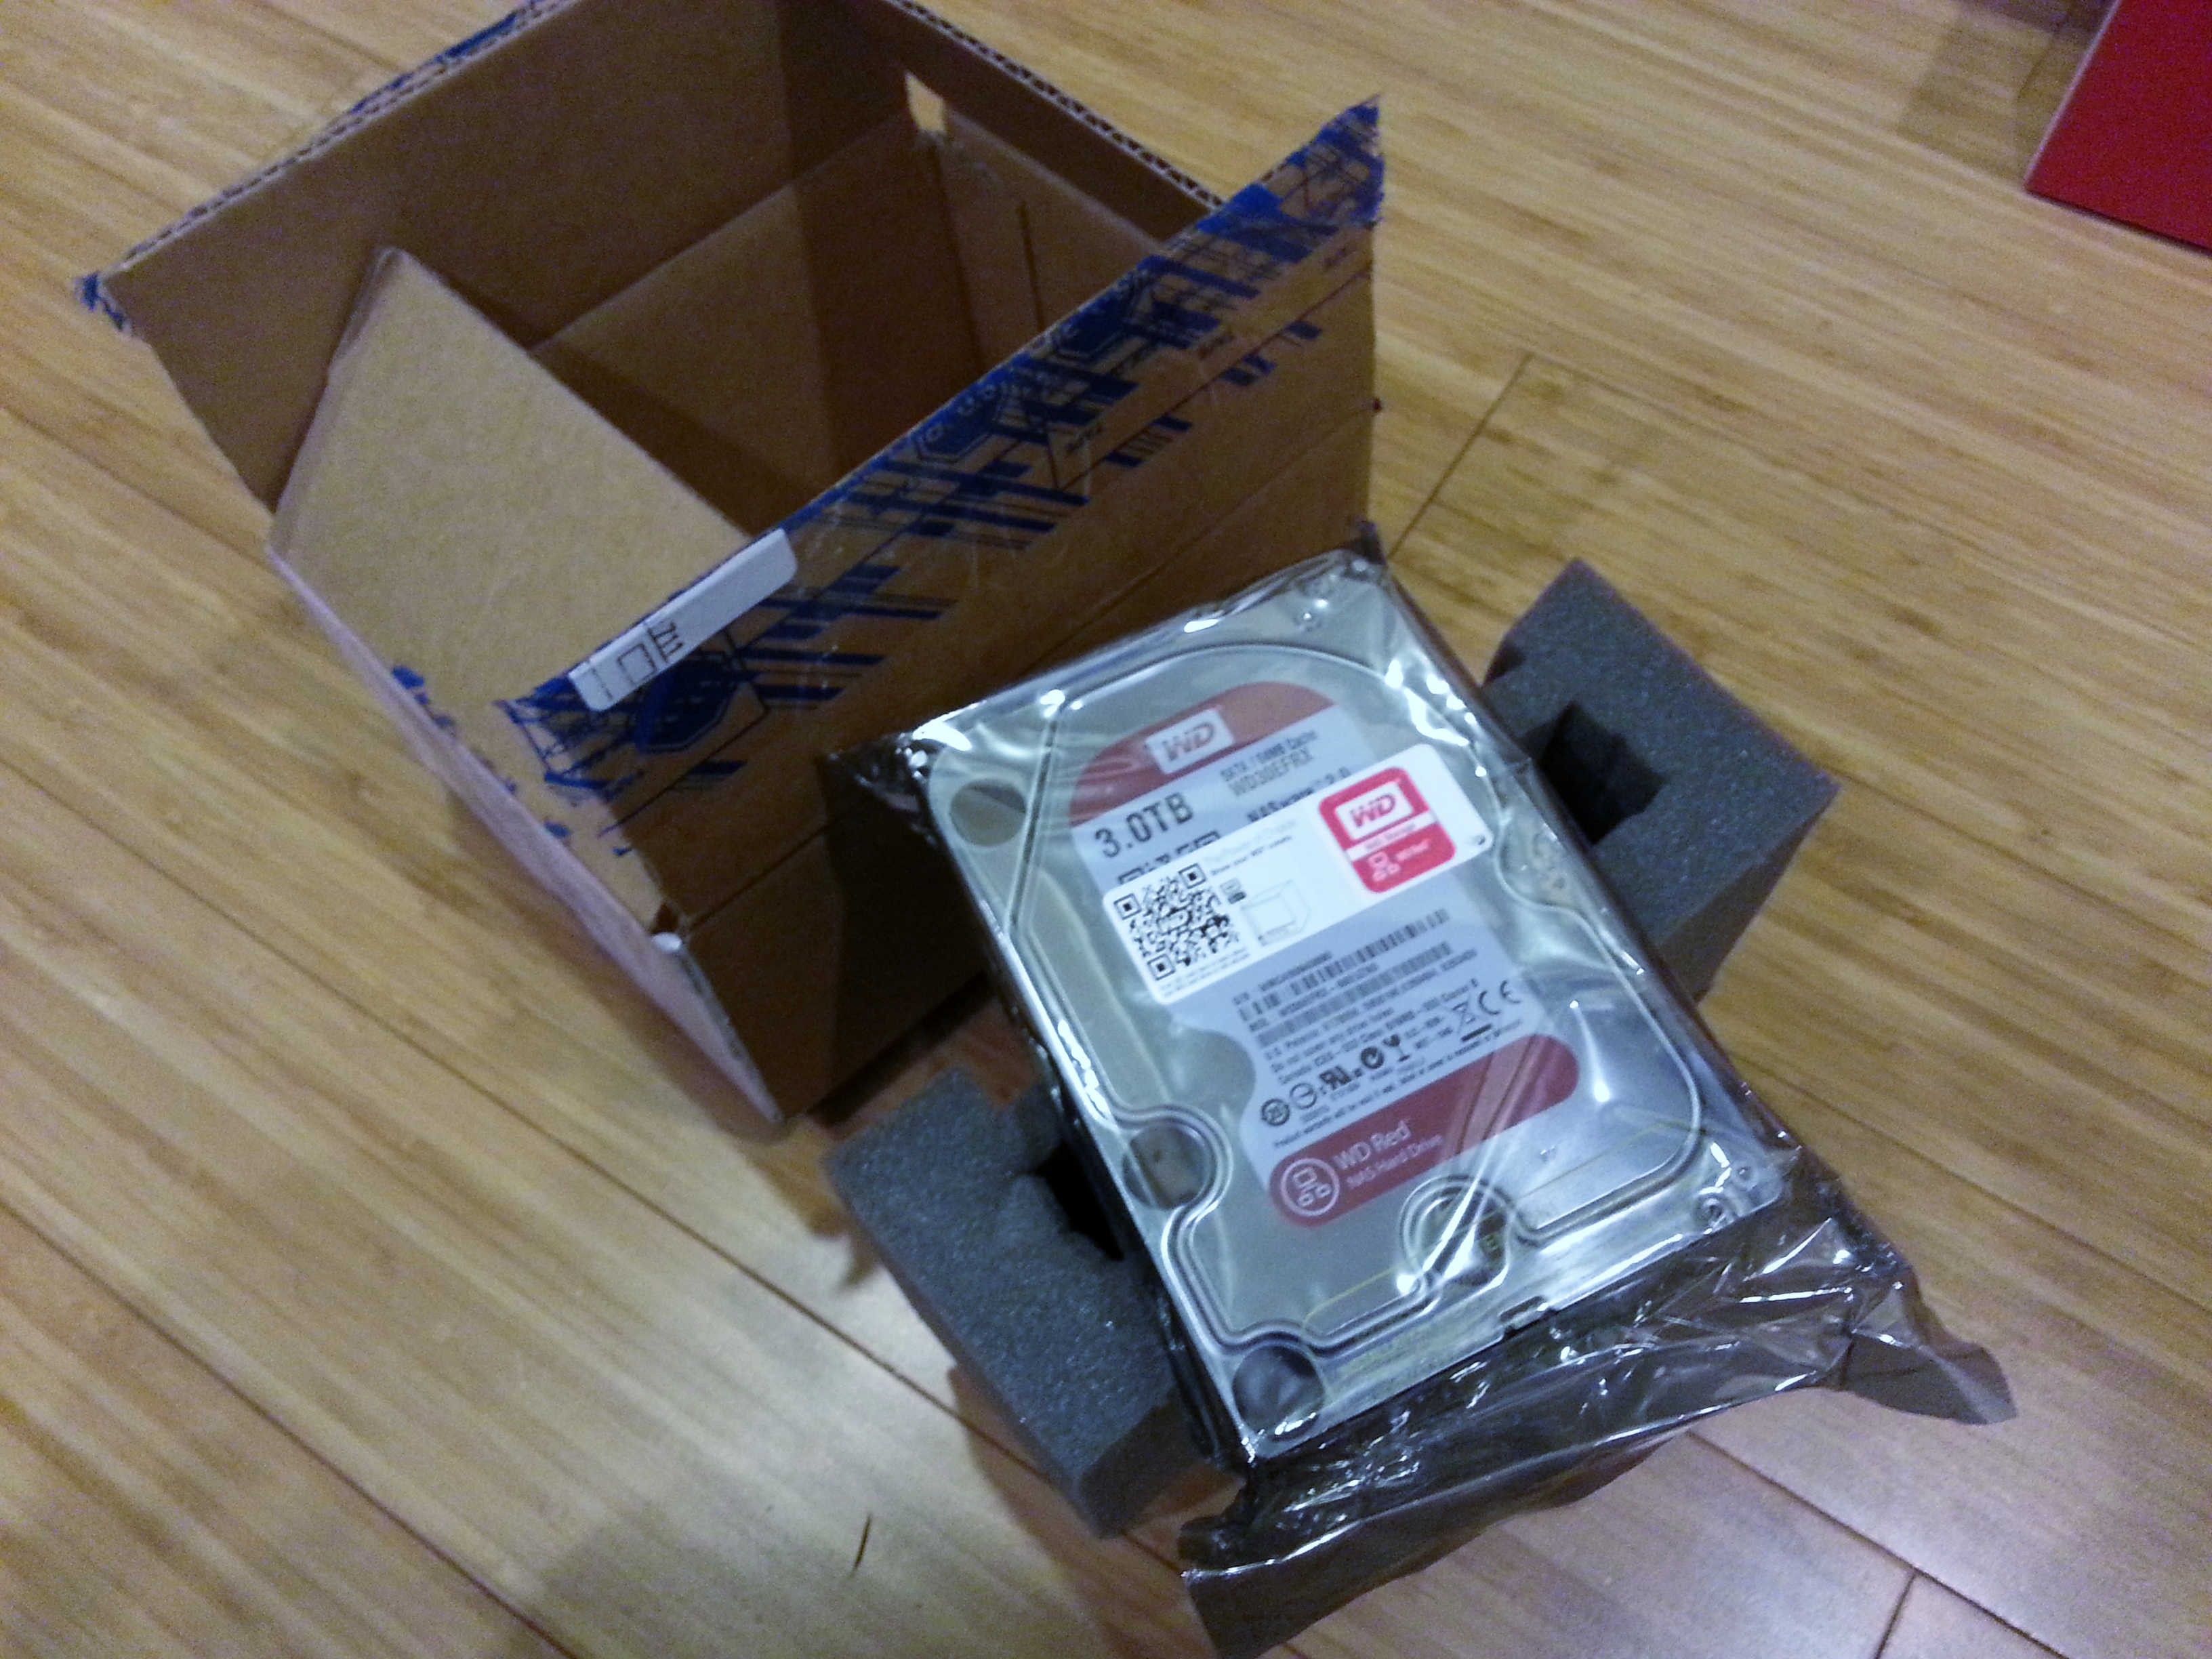 Picture of the drive, foam sleeve, and shipping box as shipped from TigerDirect.